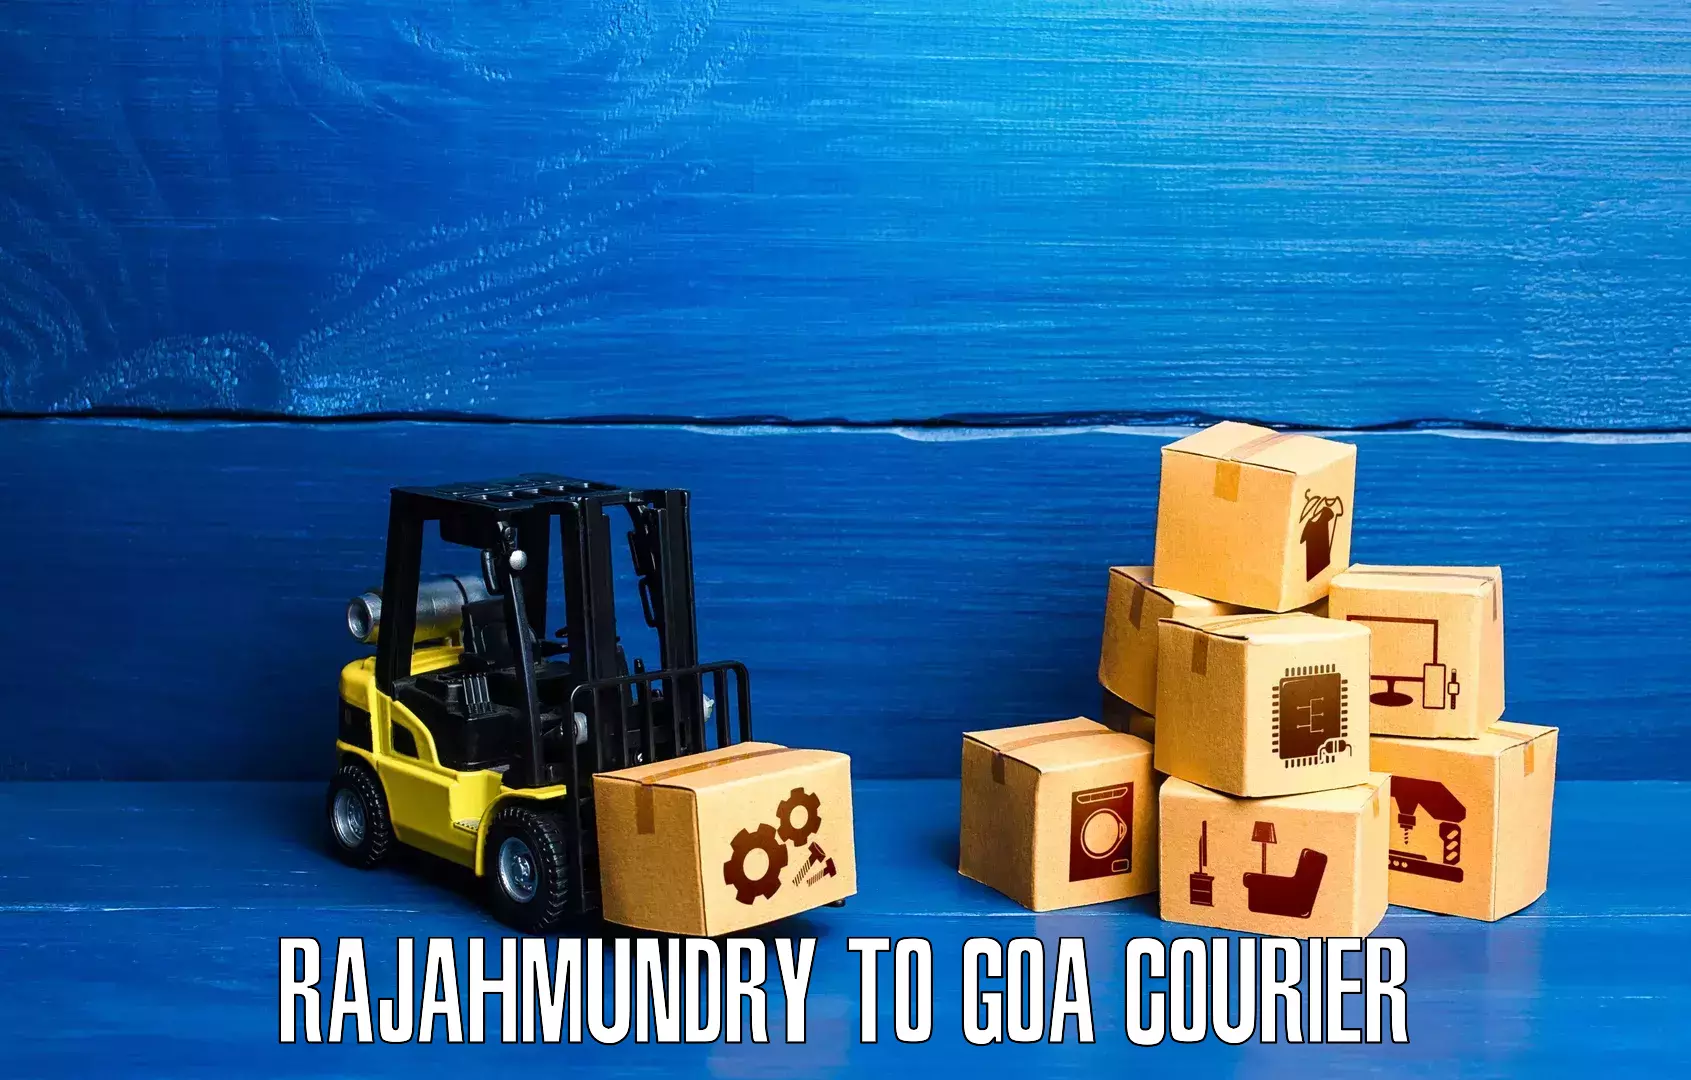 Express delivery capabilities Rajahmundry to Goa